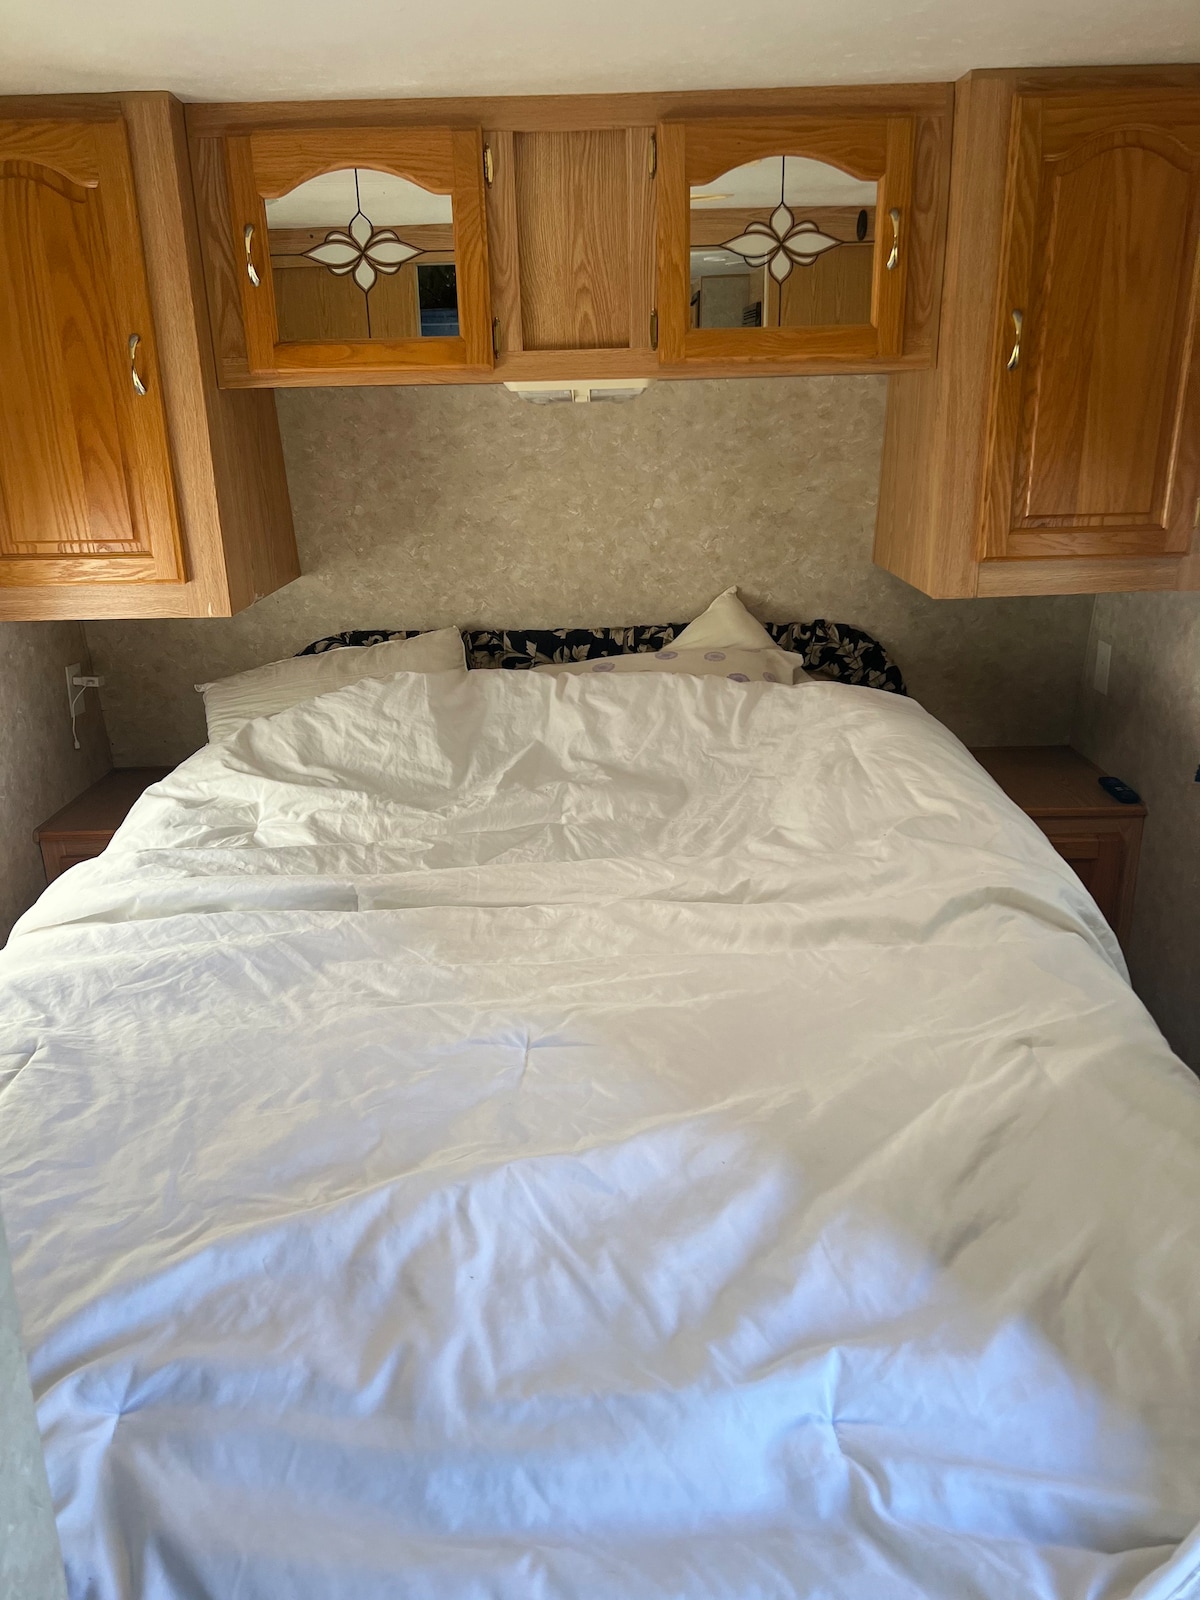 Clean camper and comfortable bed